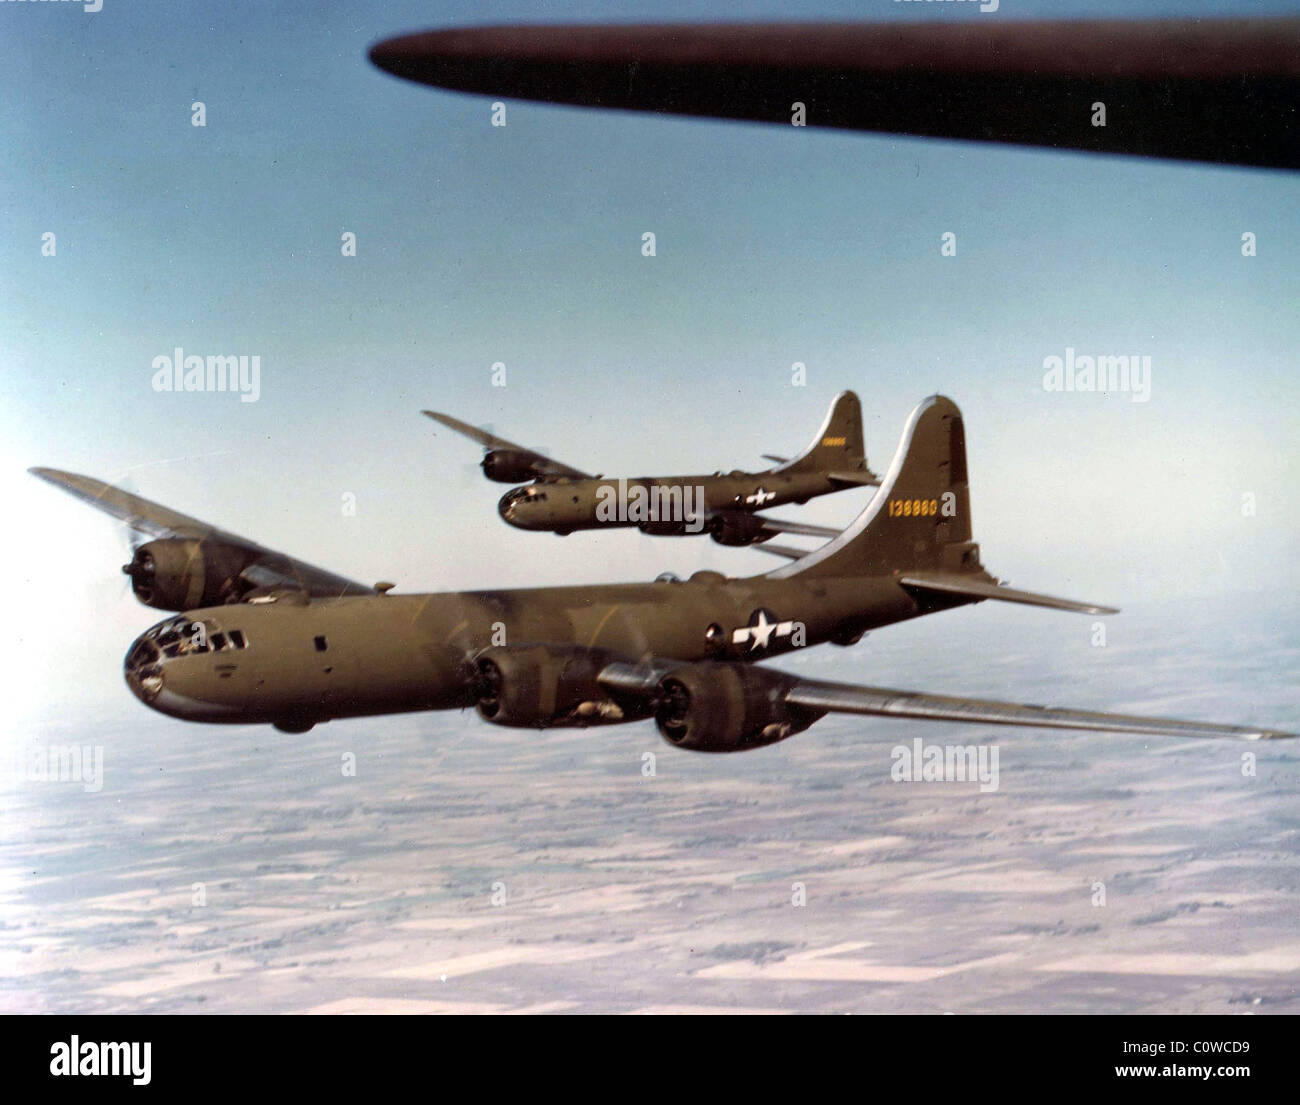 Boeing B-29 Superfortress bomber aircraft Stock Photo